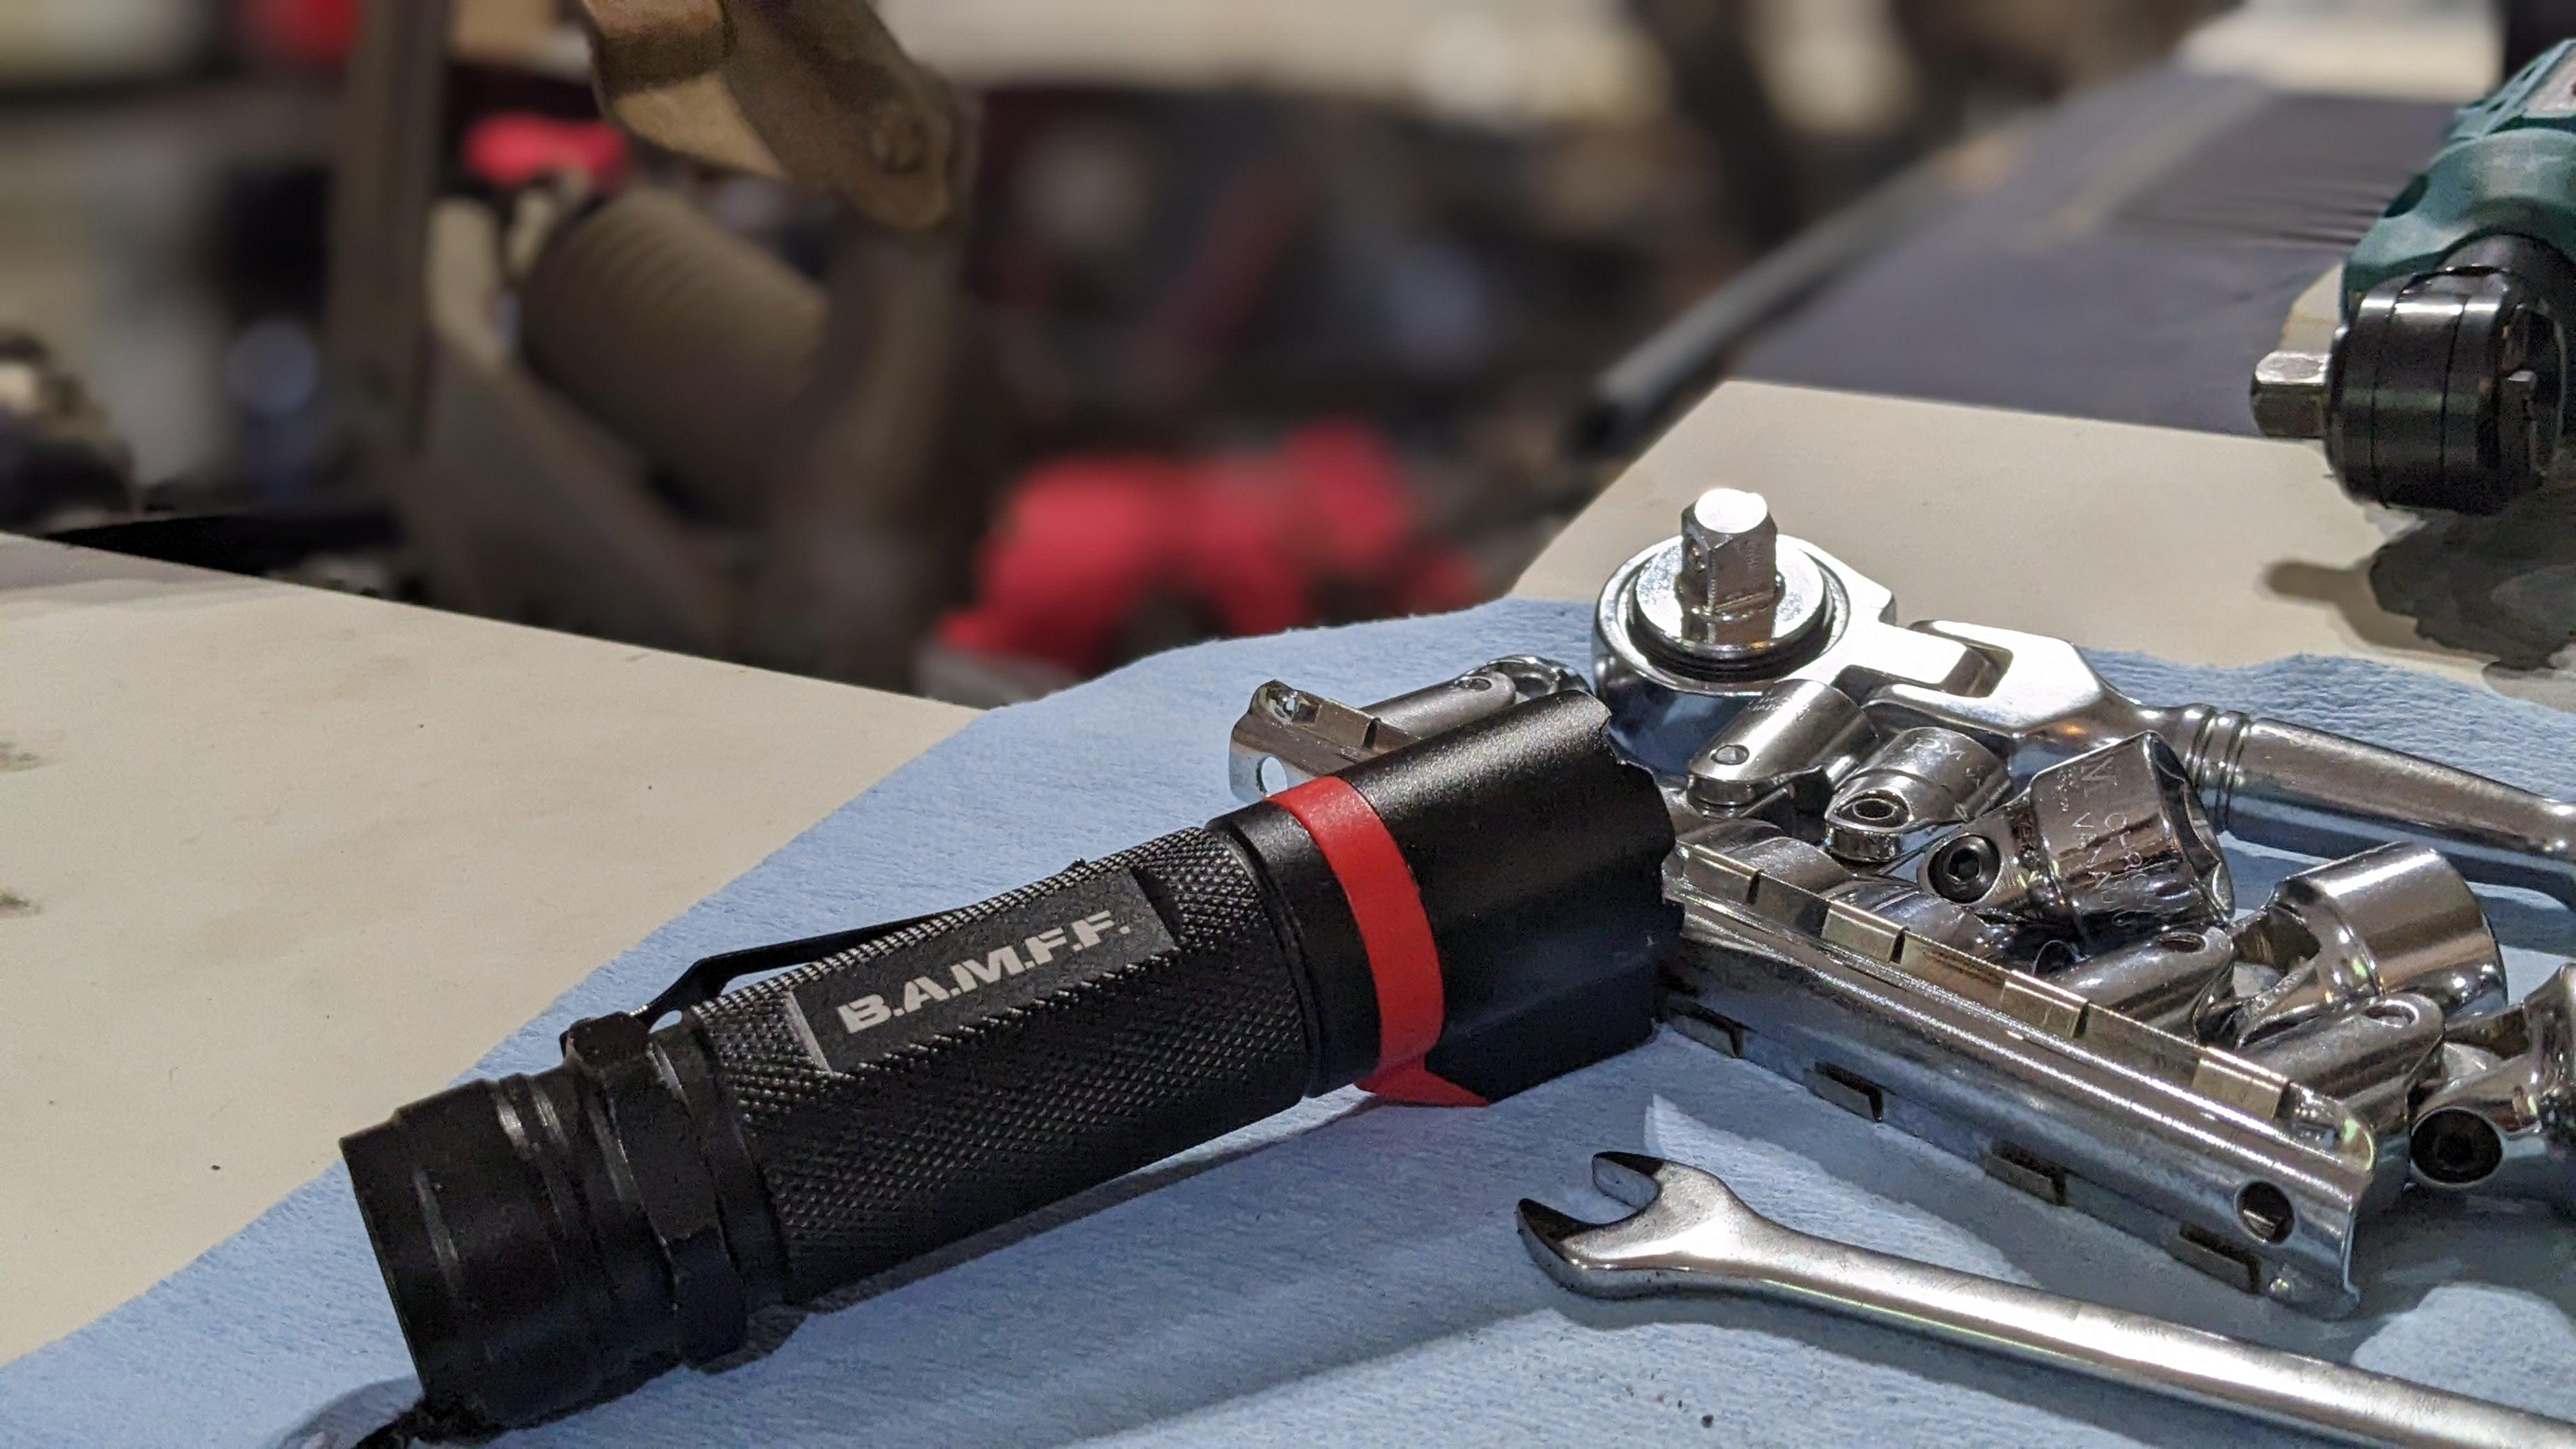 BAMFF 8.0 Tactical Flashlight sitting on a blue shop towel with some sockets, socket wrench, and a box end wrench. Blurred out car engine bay in the background.